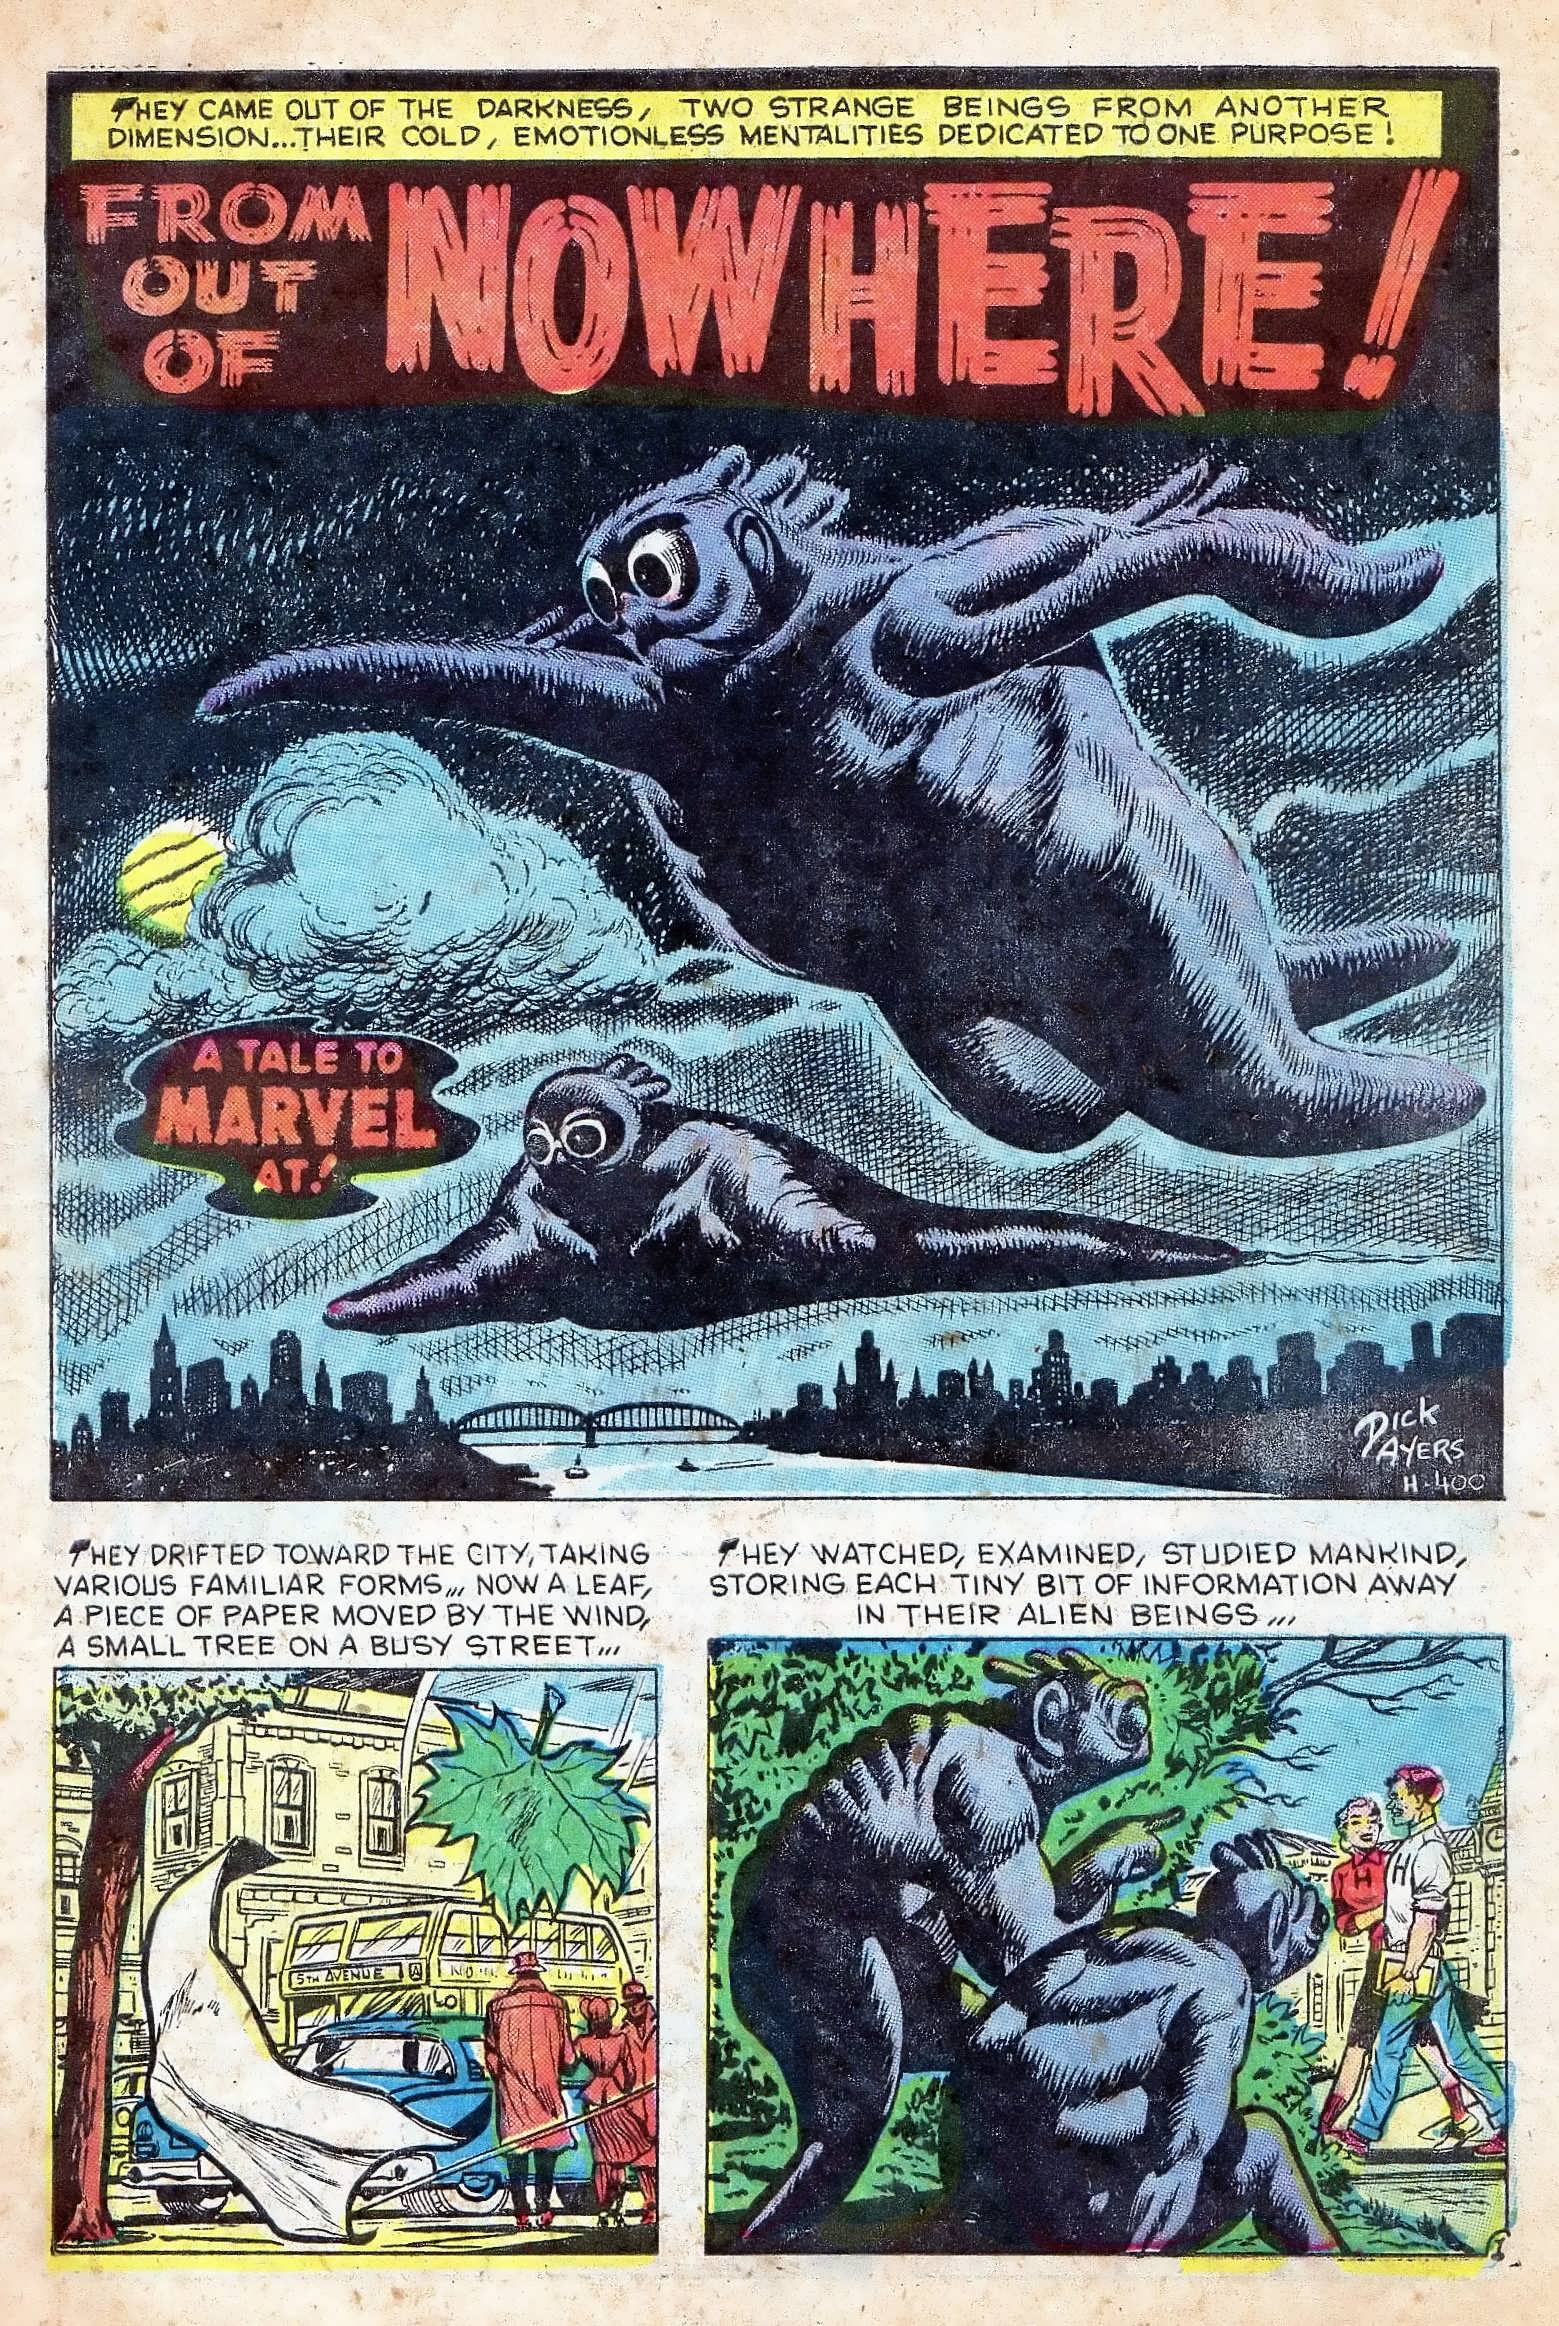 Marvel Tales (1949) 141 Page 2